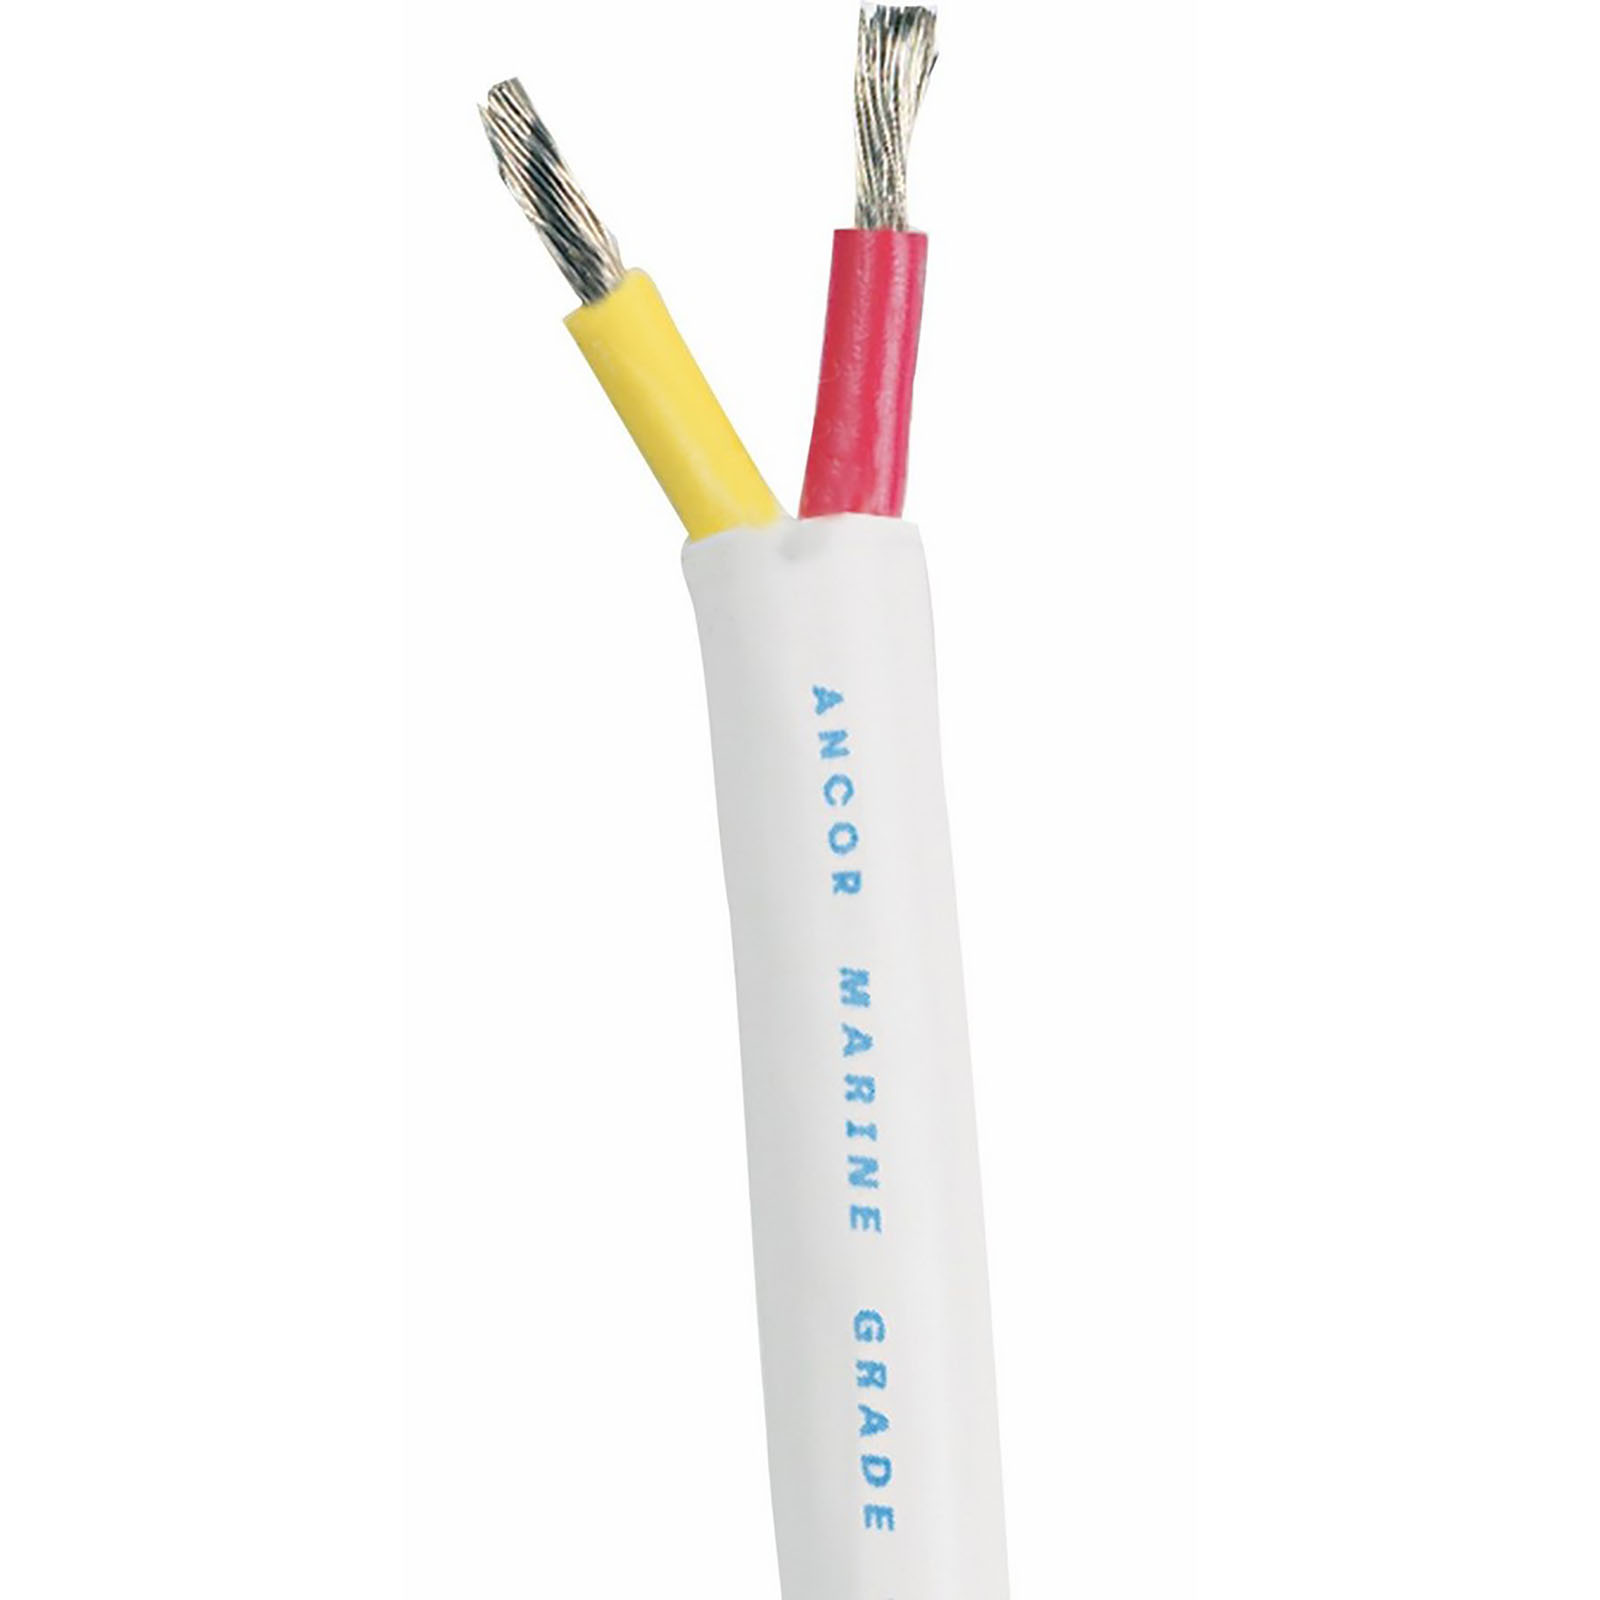 Ancor 124110 100' 16/2 AWG (2 x 5mm²) Marine Grade Electrical Safety Duplex Cable